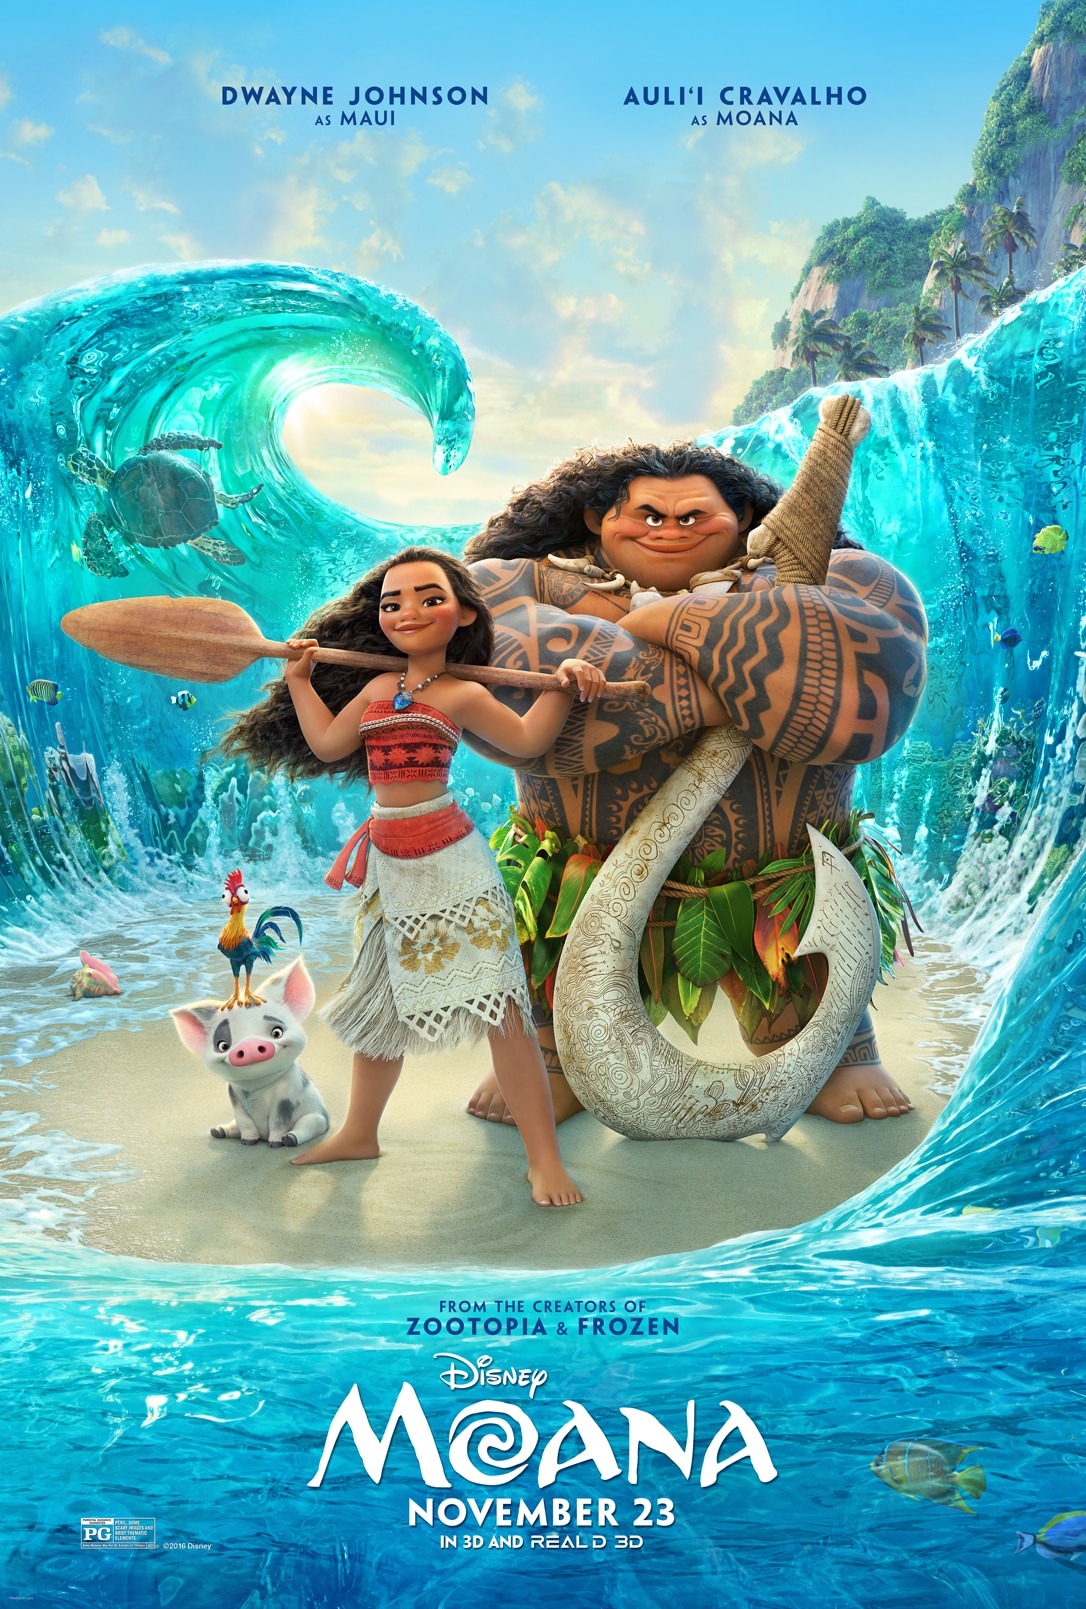 "You're Welcome" Clip from Moana!! #Moana